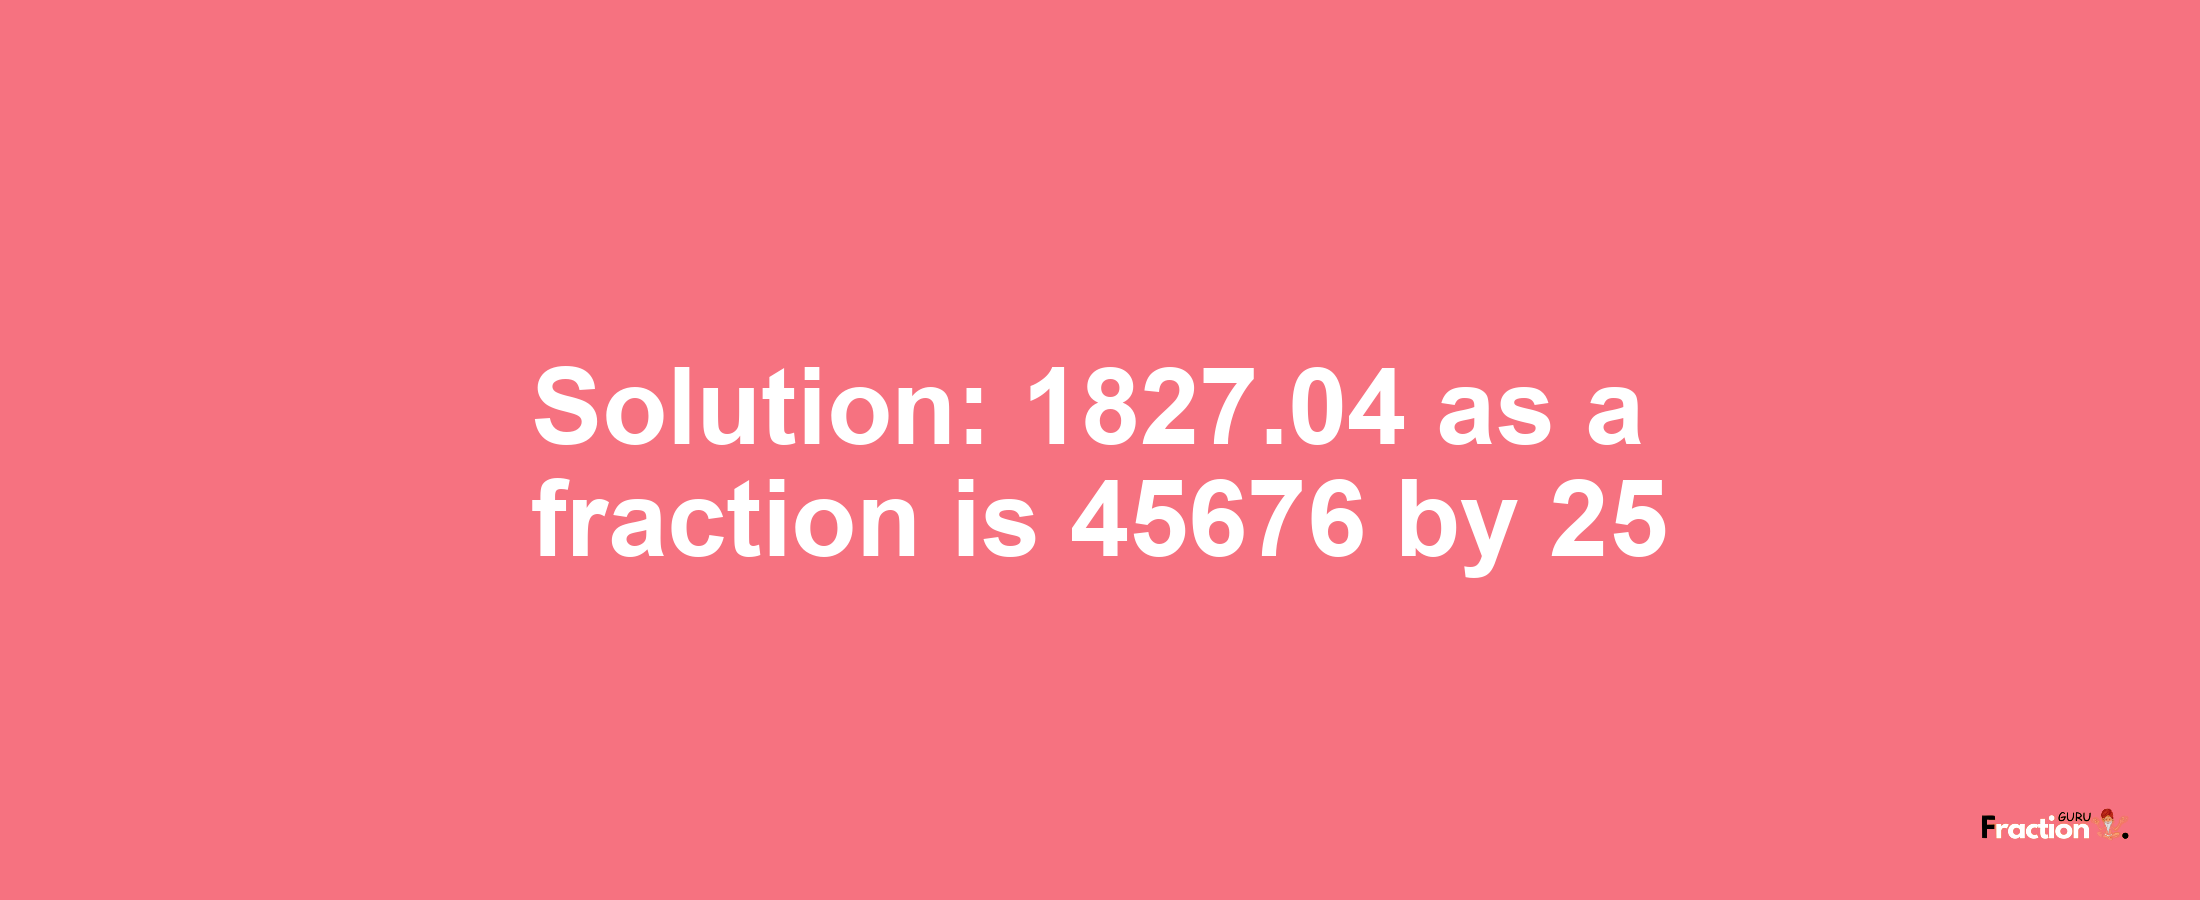 Solution:1827.04 as a fraction is 45676/25